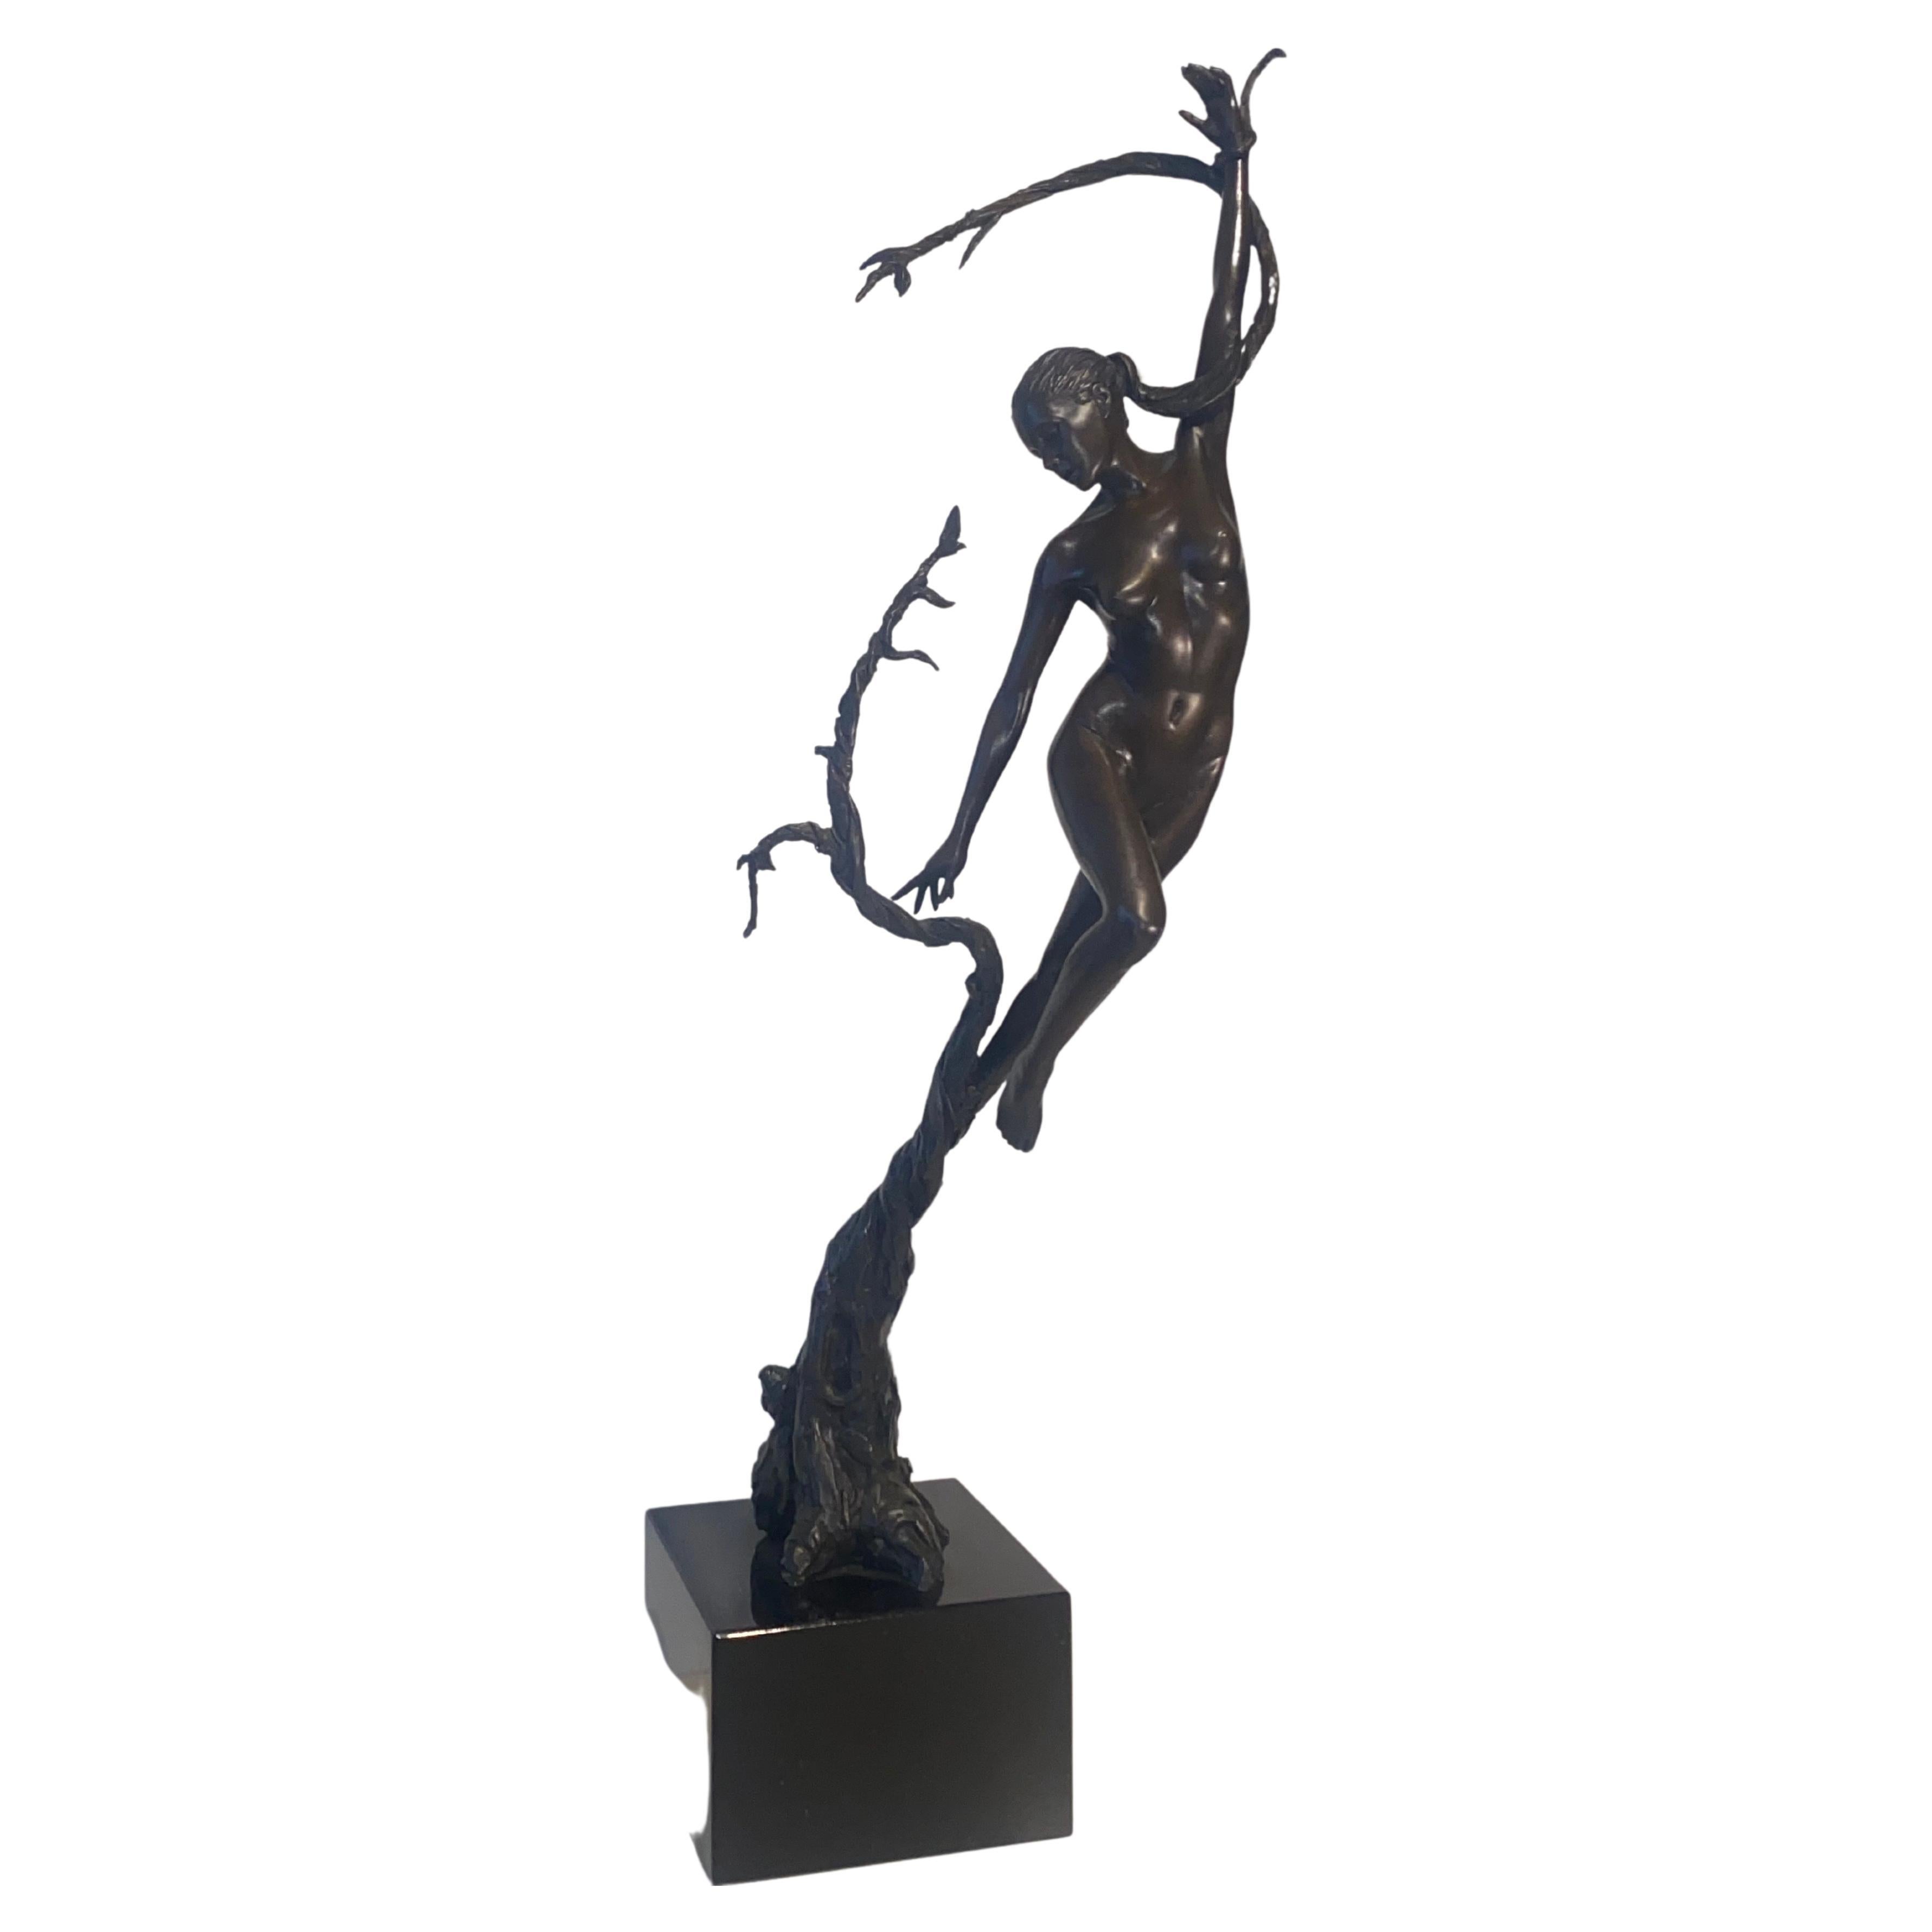 Neil Welch Nature’s Grace A Large Limited Edition of 25 Bronze Sculpture 1/25 For Sale